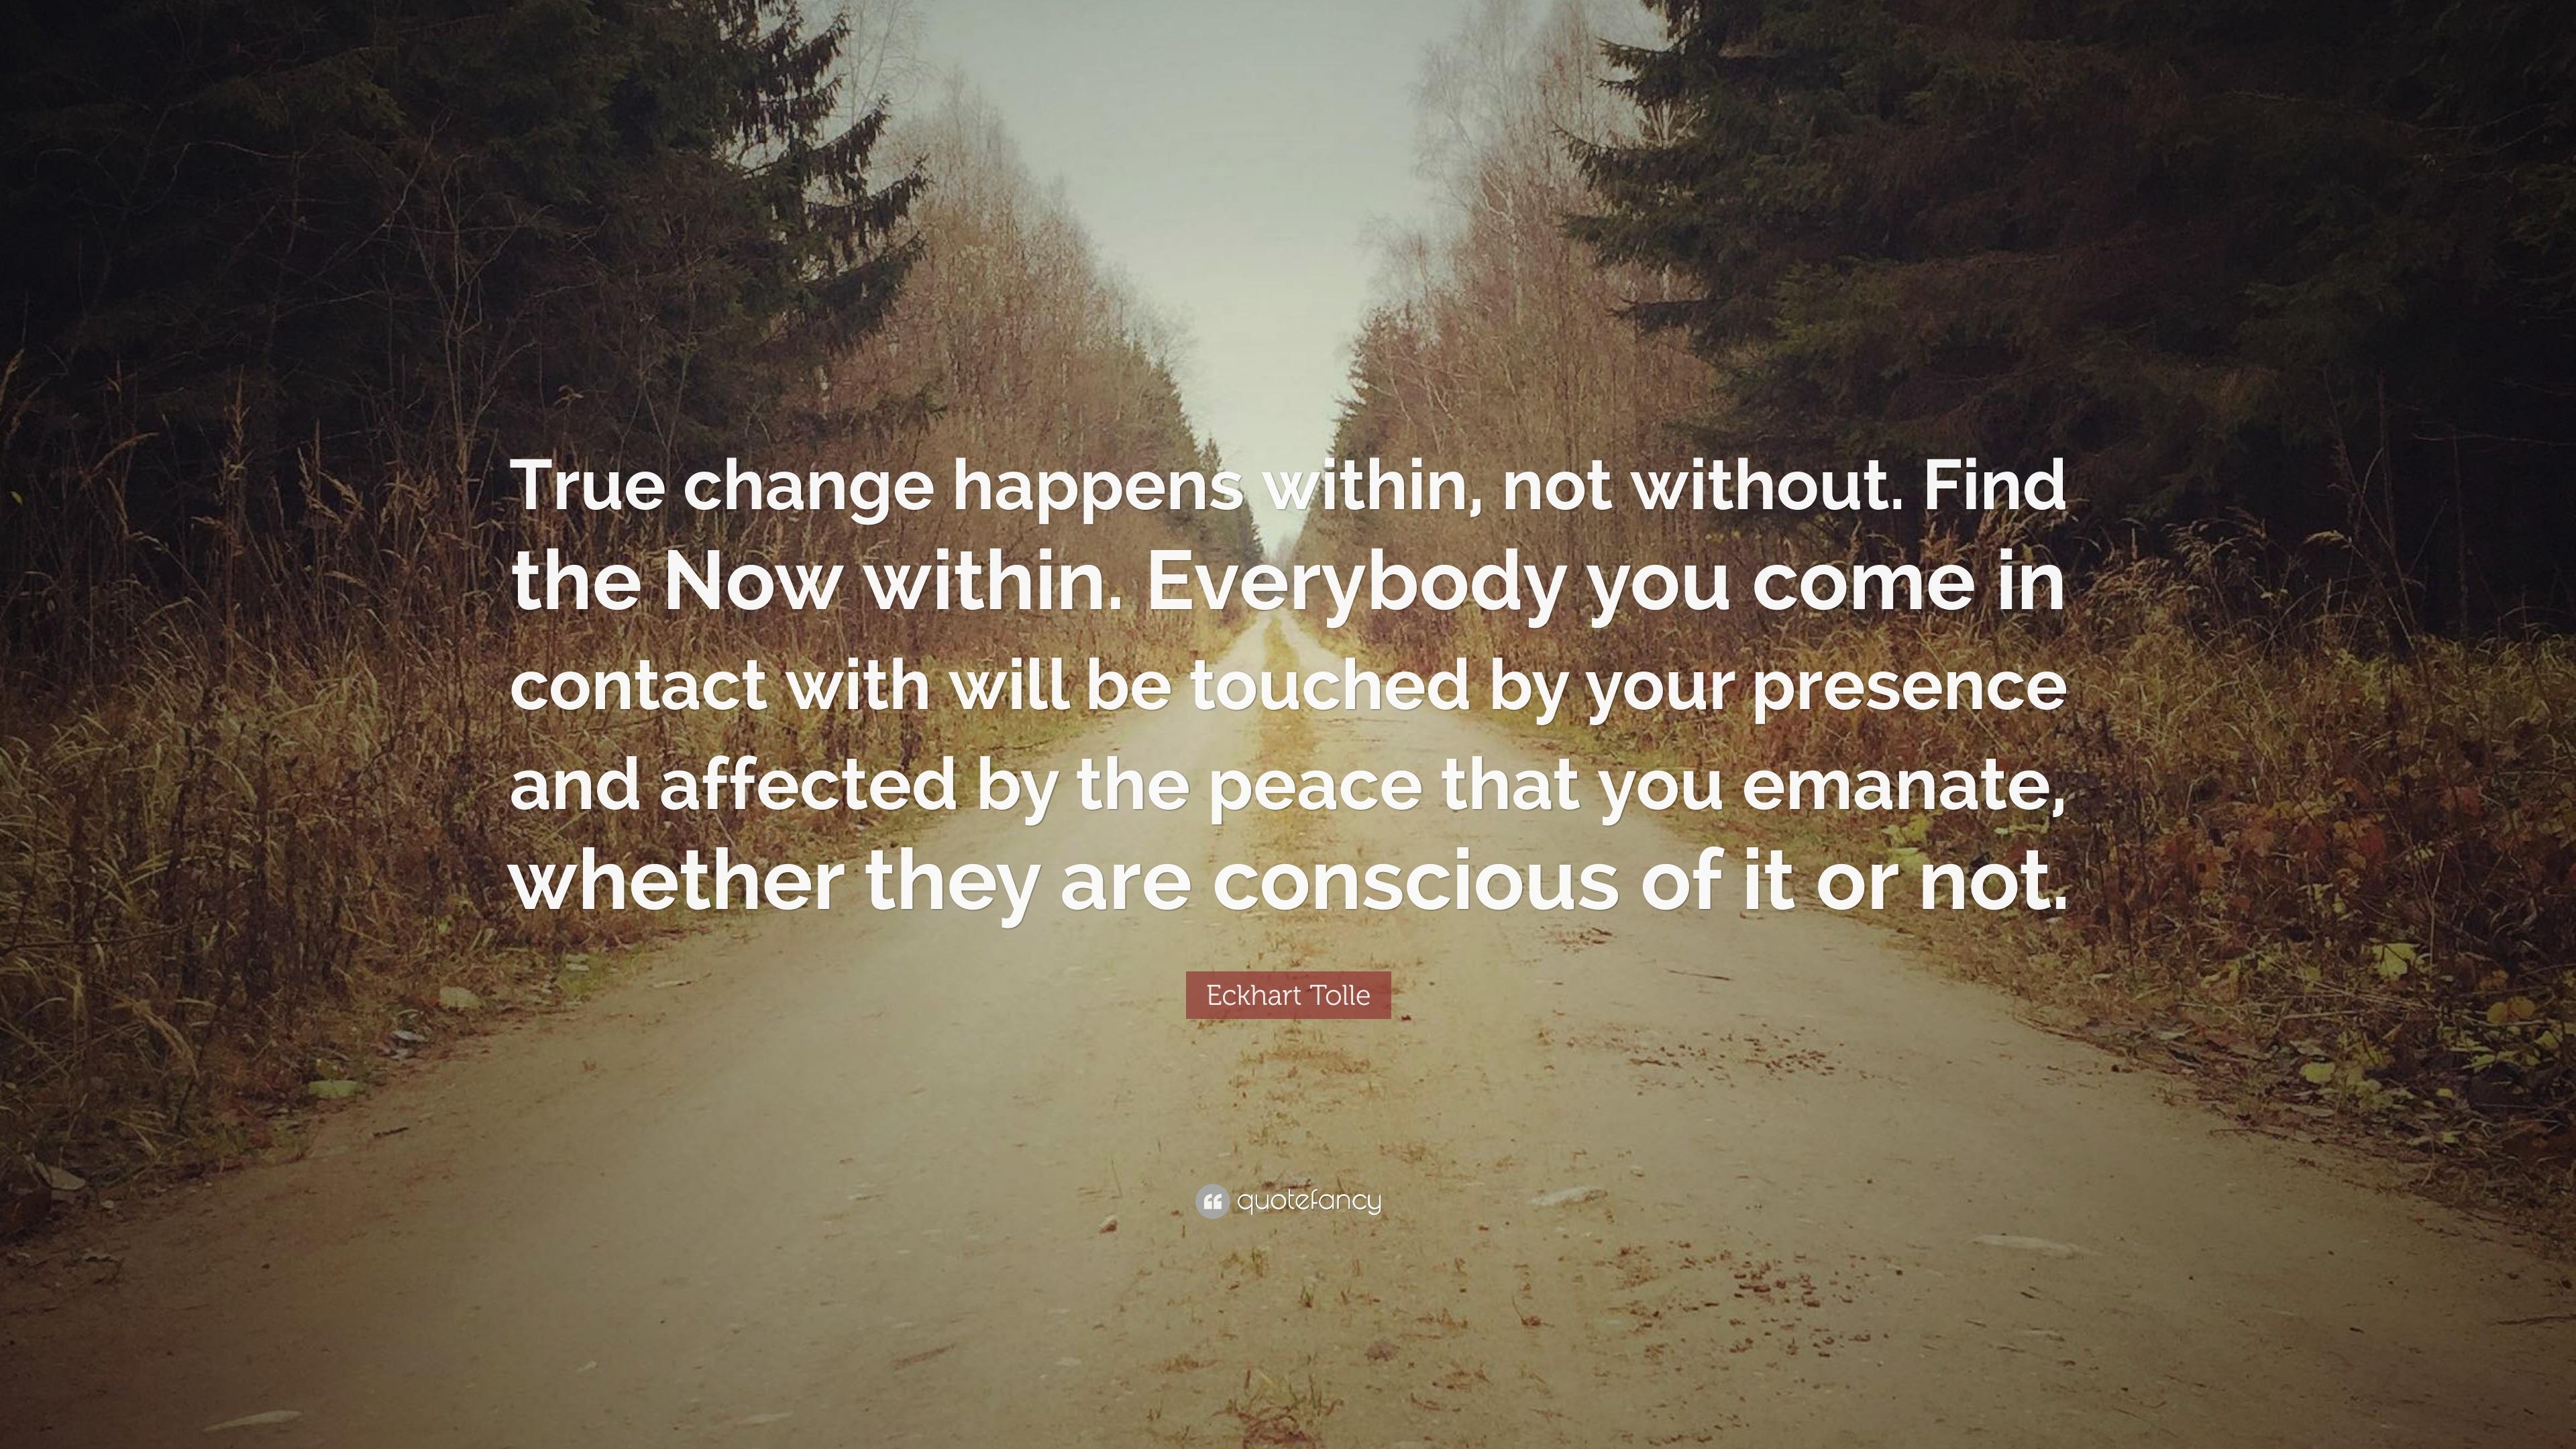 Eckhart Tolle Quote: “True change happens within, not without. Find the ...